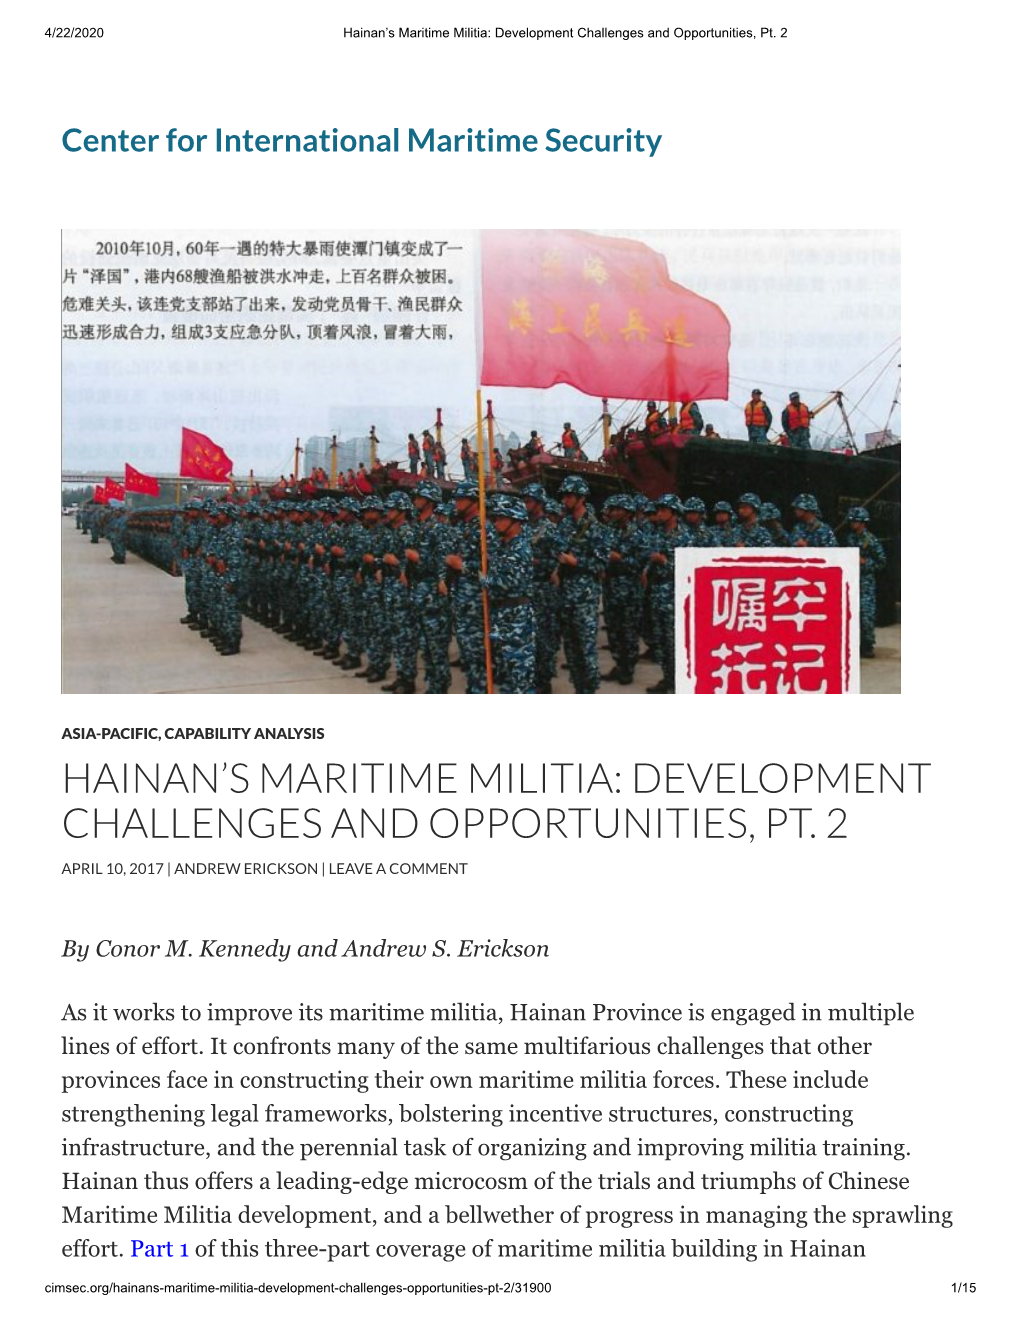 Hainan's Maritime Militia: Development Challenges and Opportunities, Pt. 2